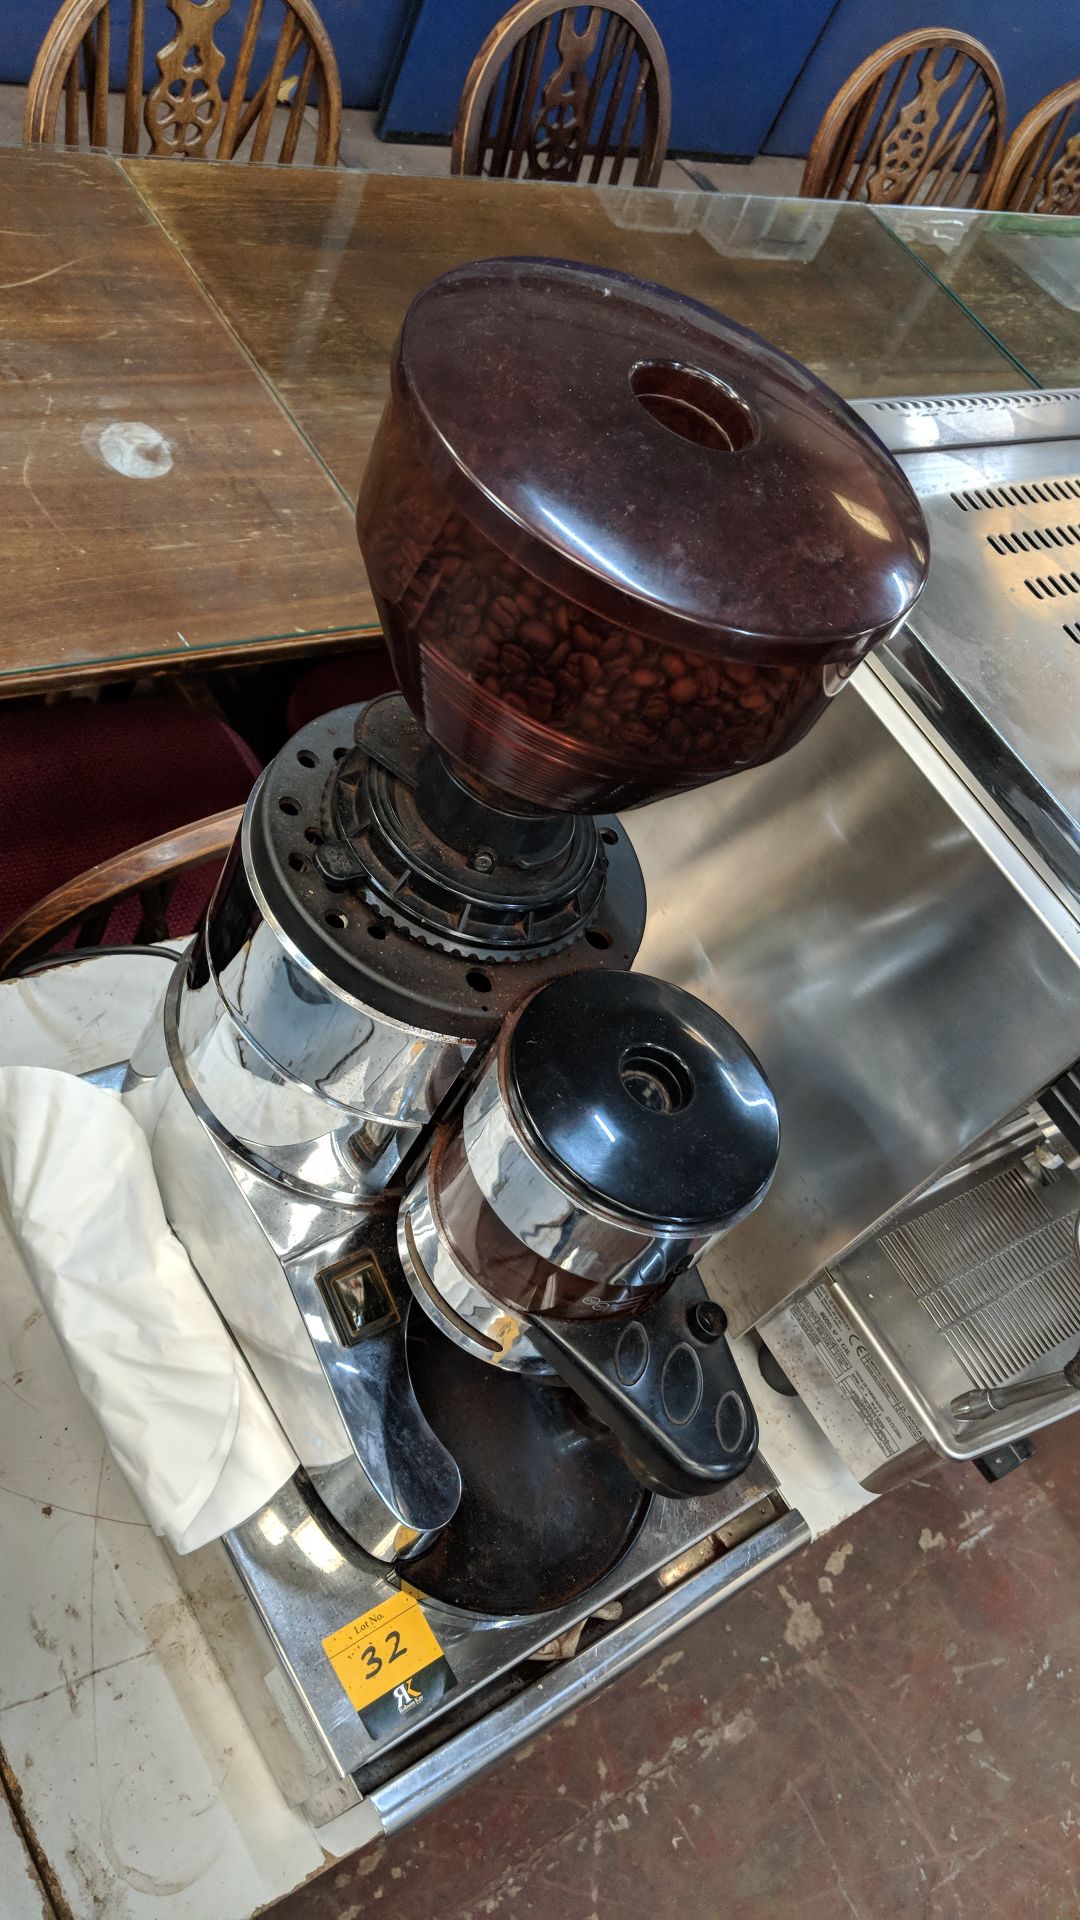 Heavy-duty commercial coffee grinder plus stainless steel knock box upon which it is situatedLots 20 - Image 5 of 5